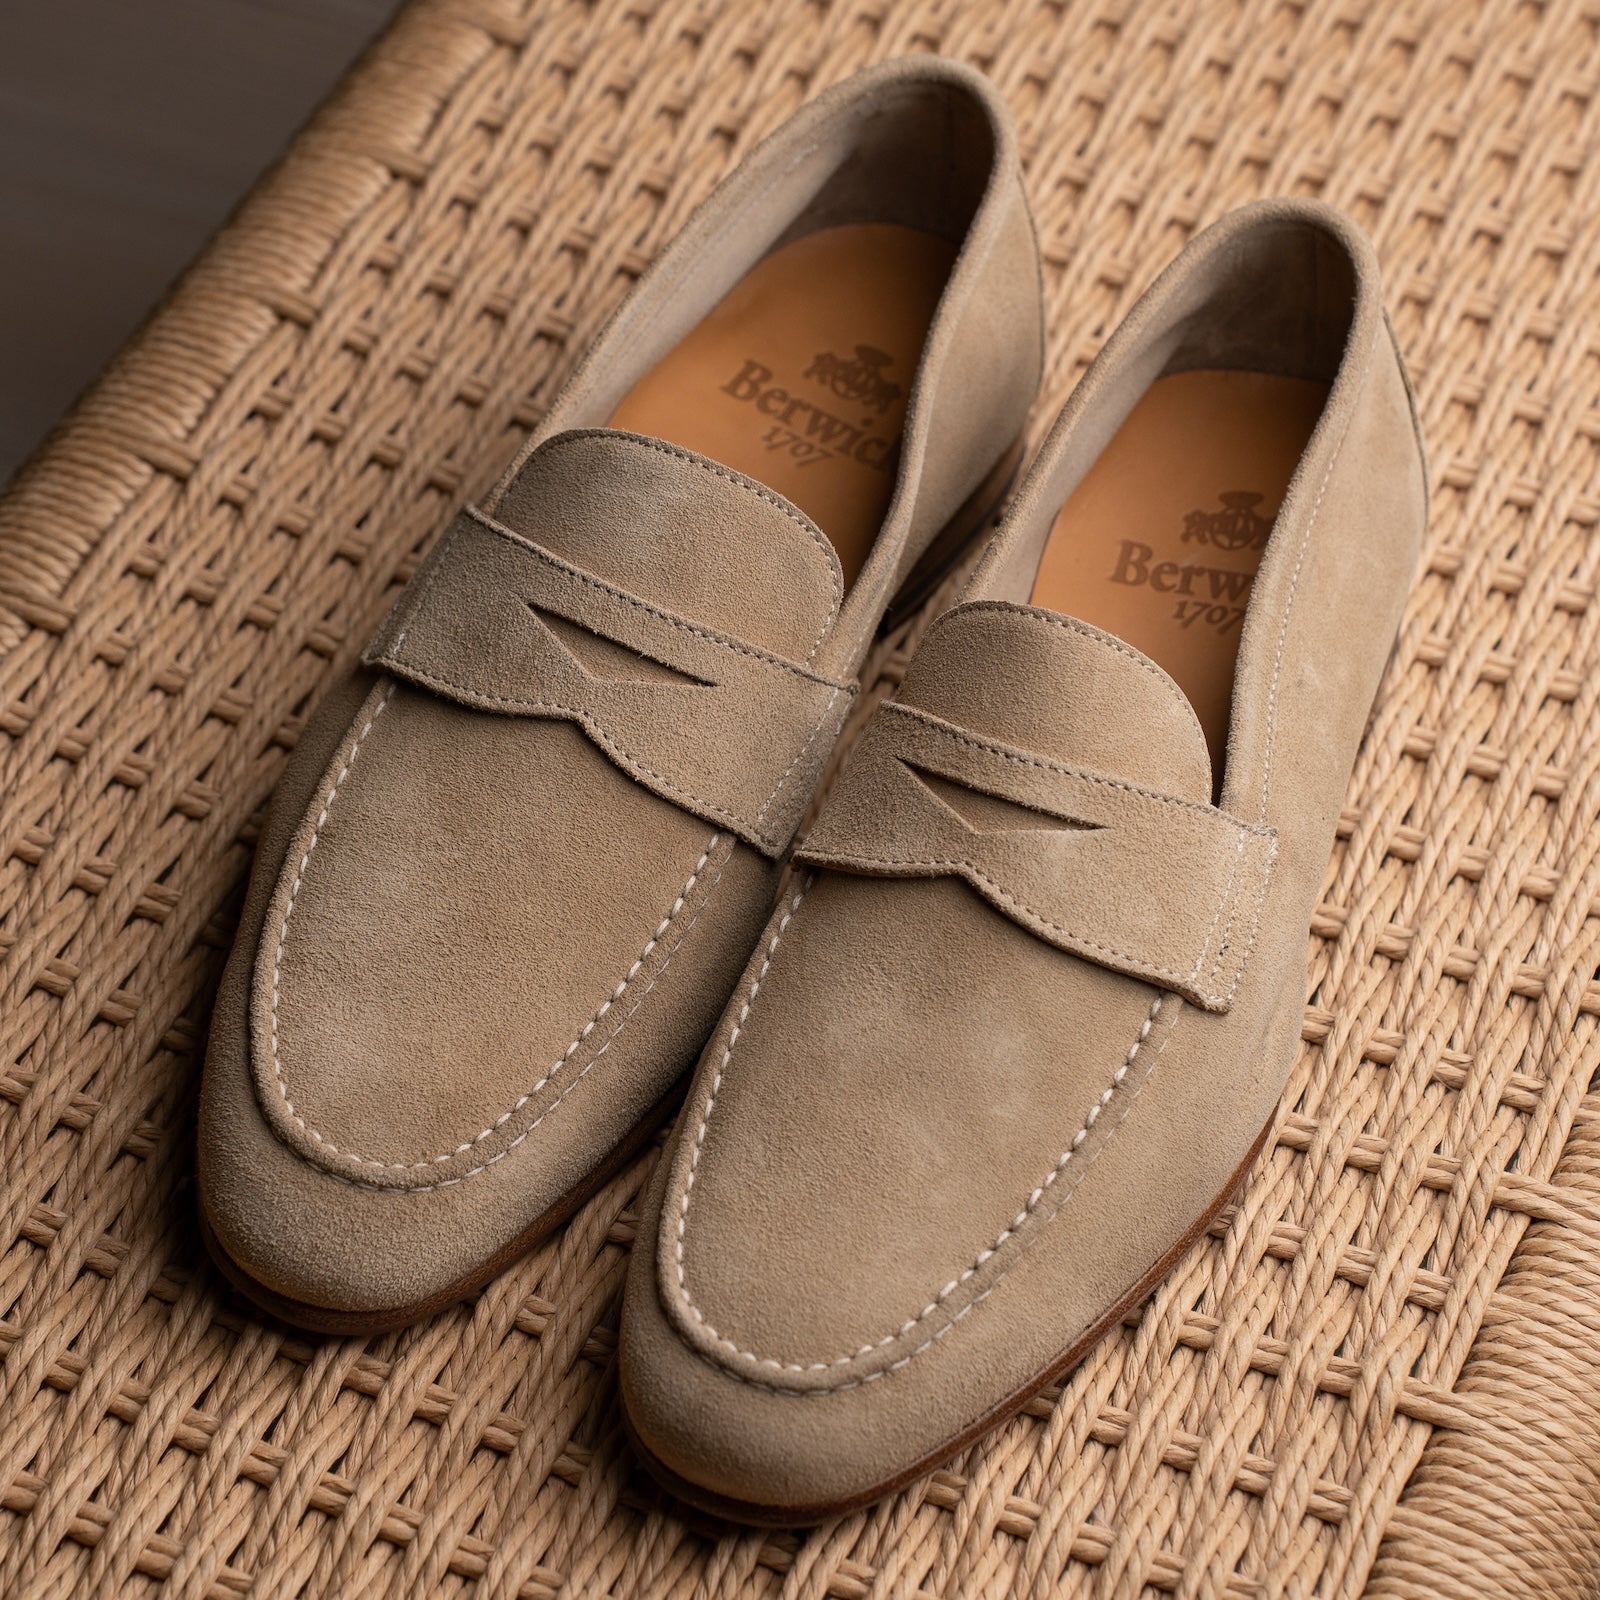 Unlined Penny Loafer - Sand Suede